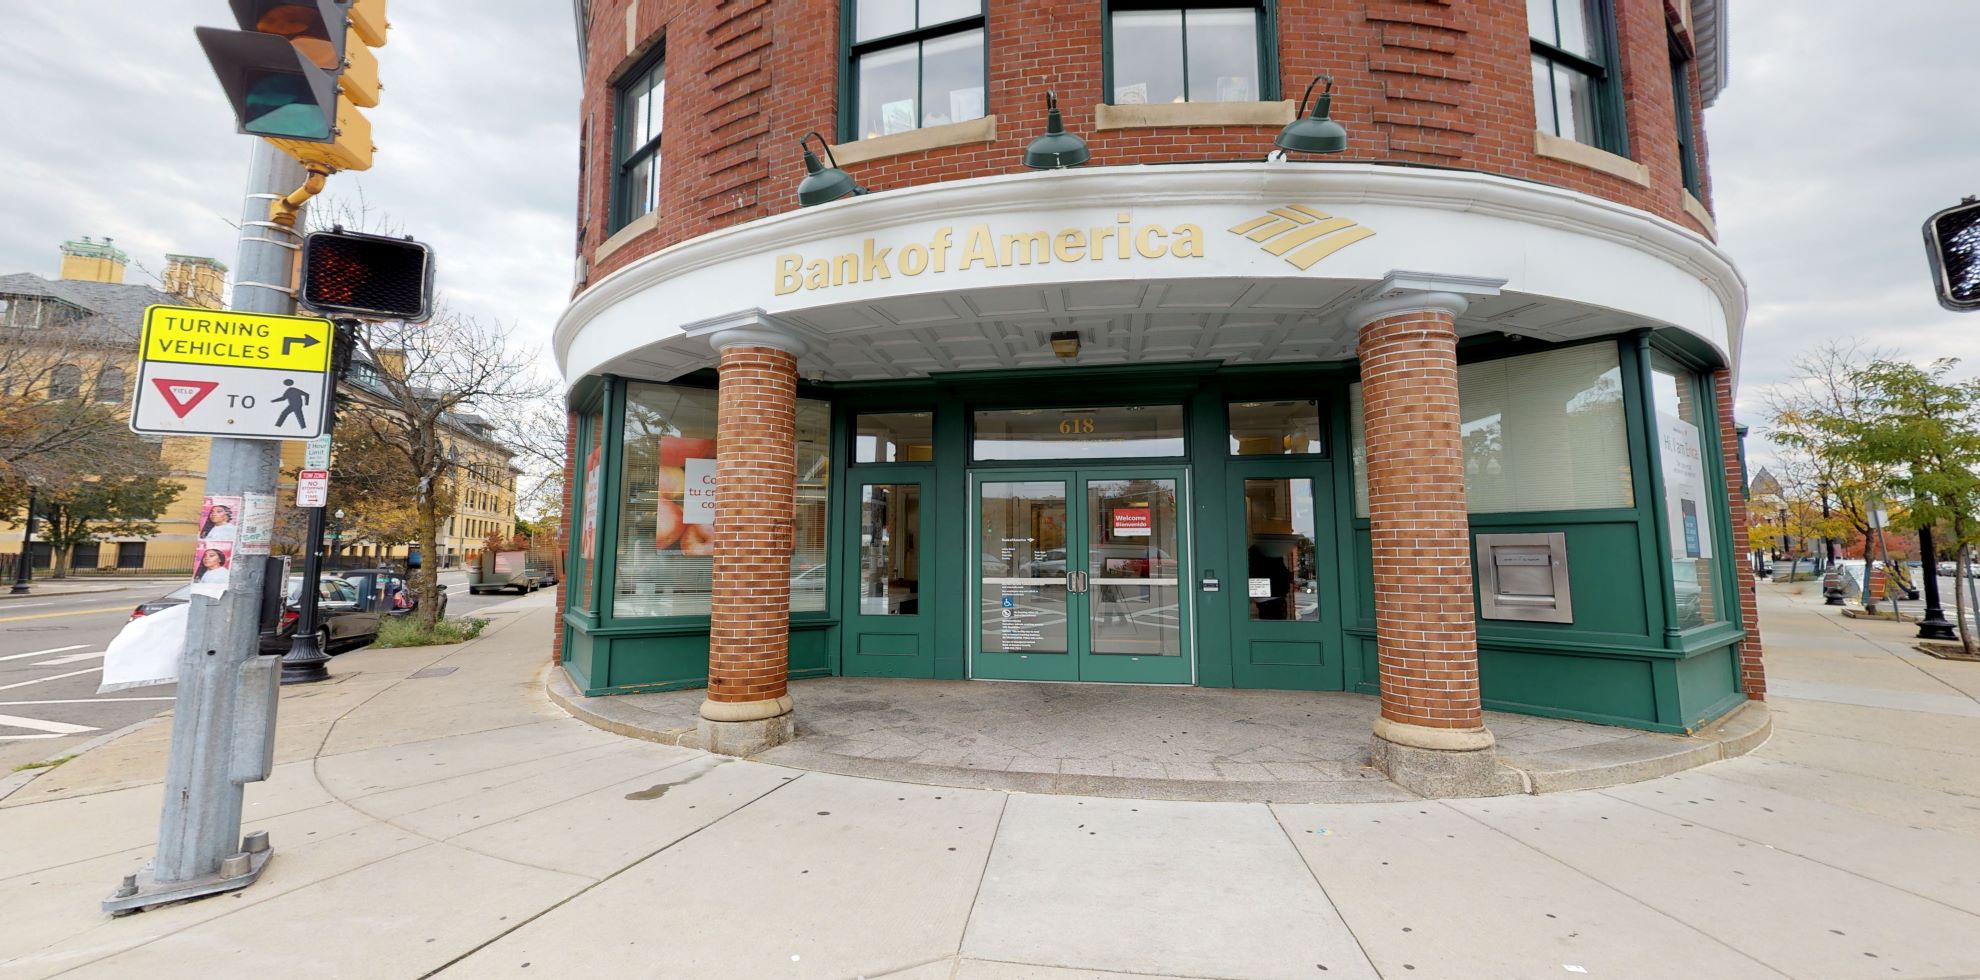 Bank of America financial center with walk-up ATM | 618 Washington St, Dorchester, MA 02124